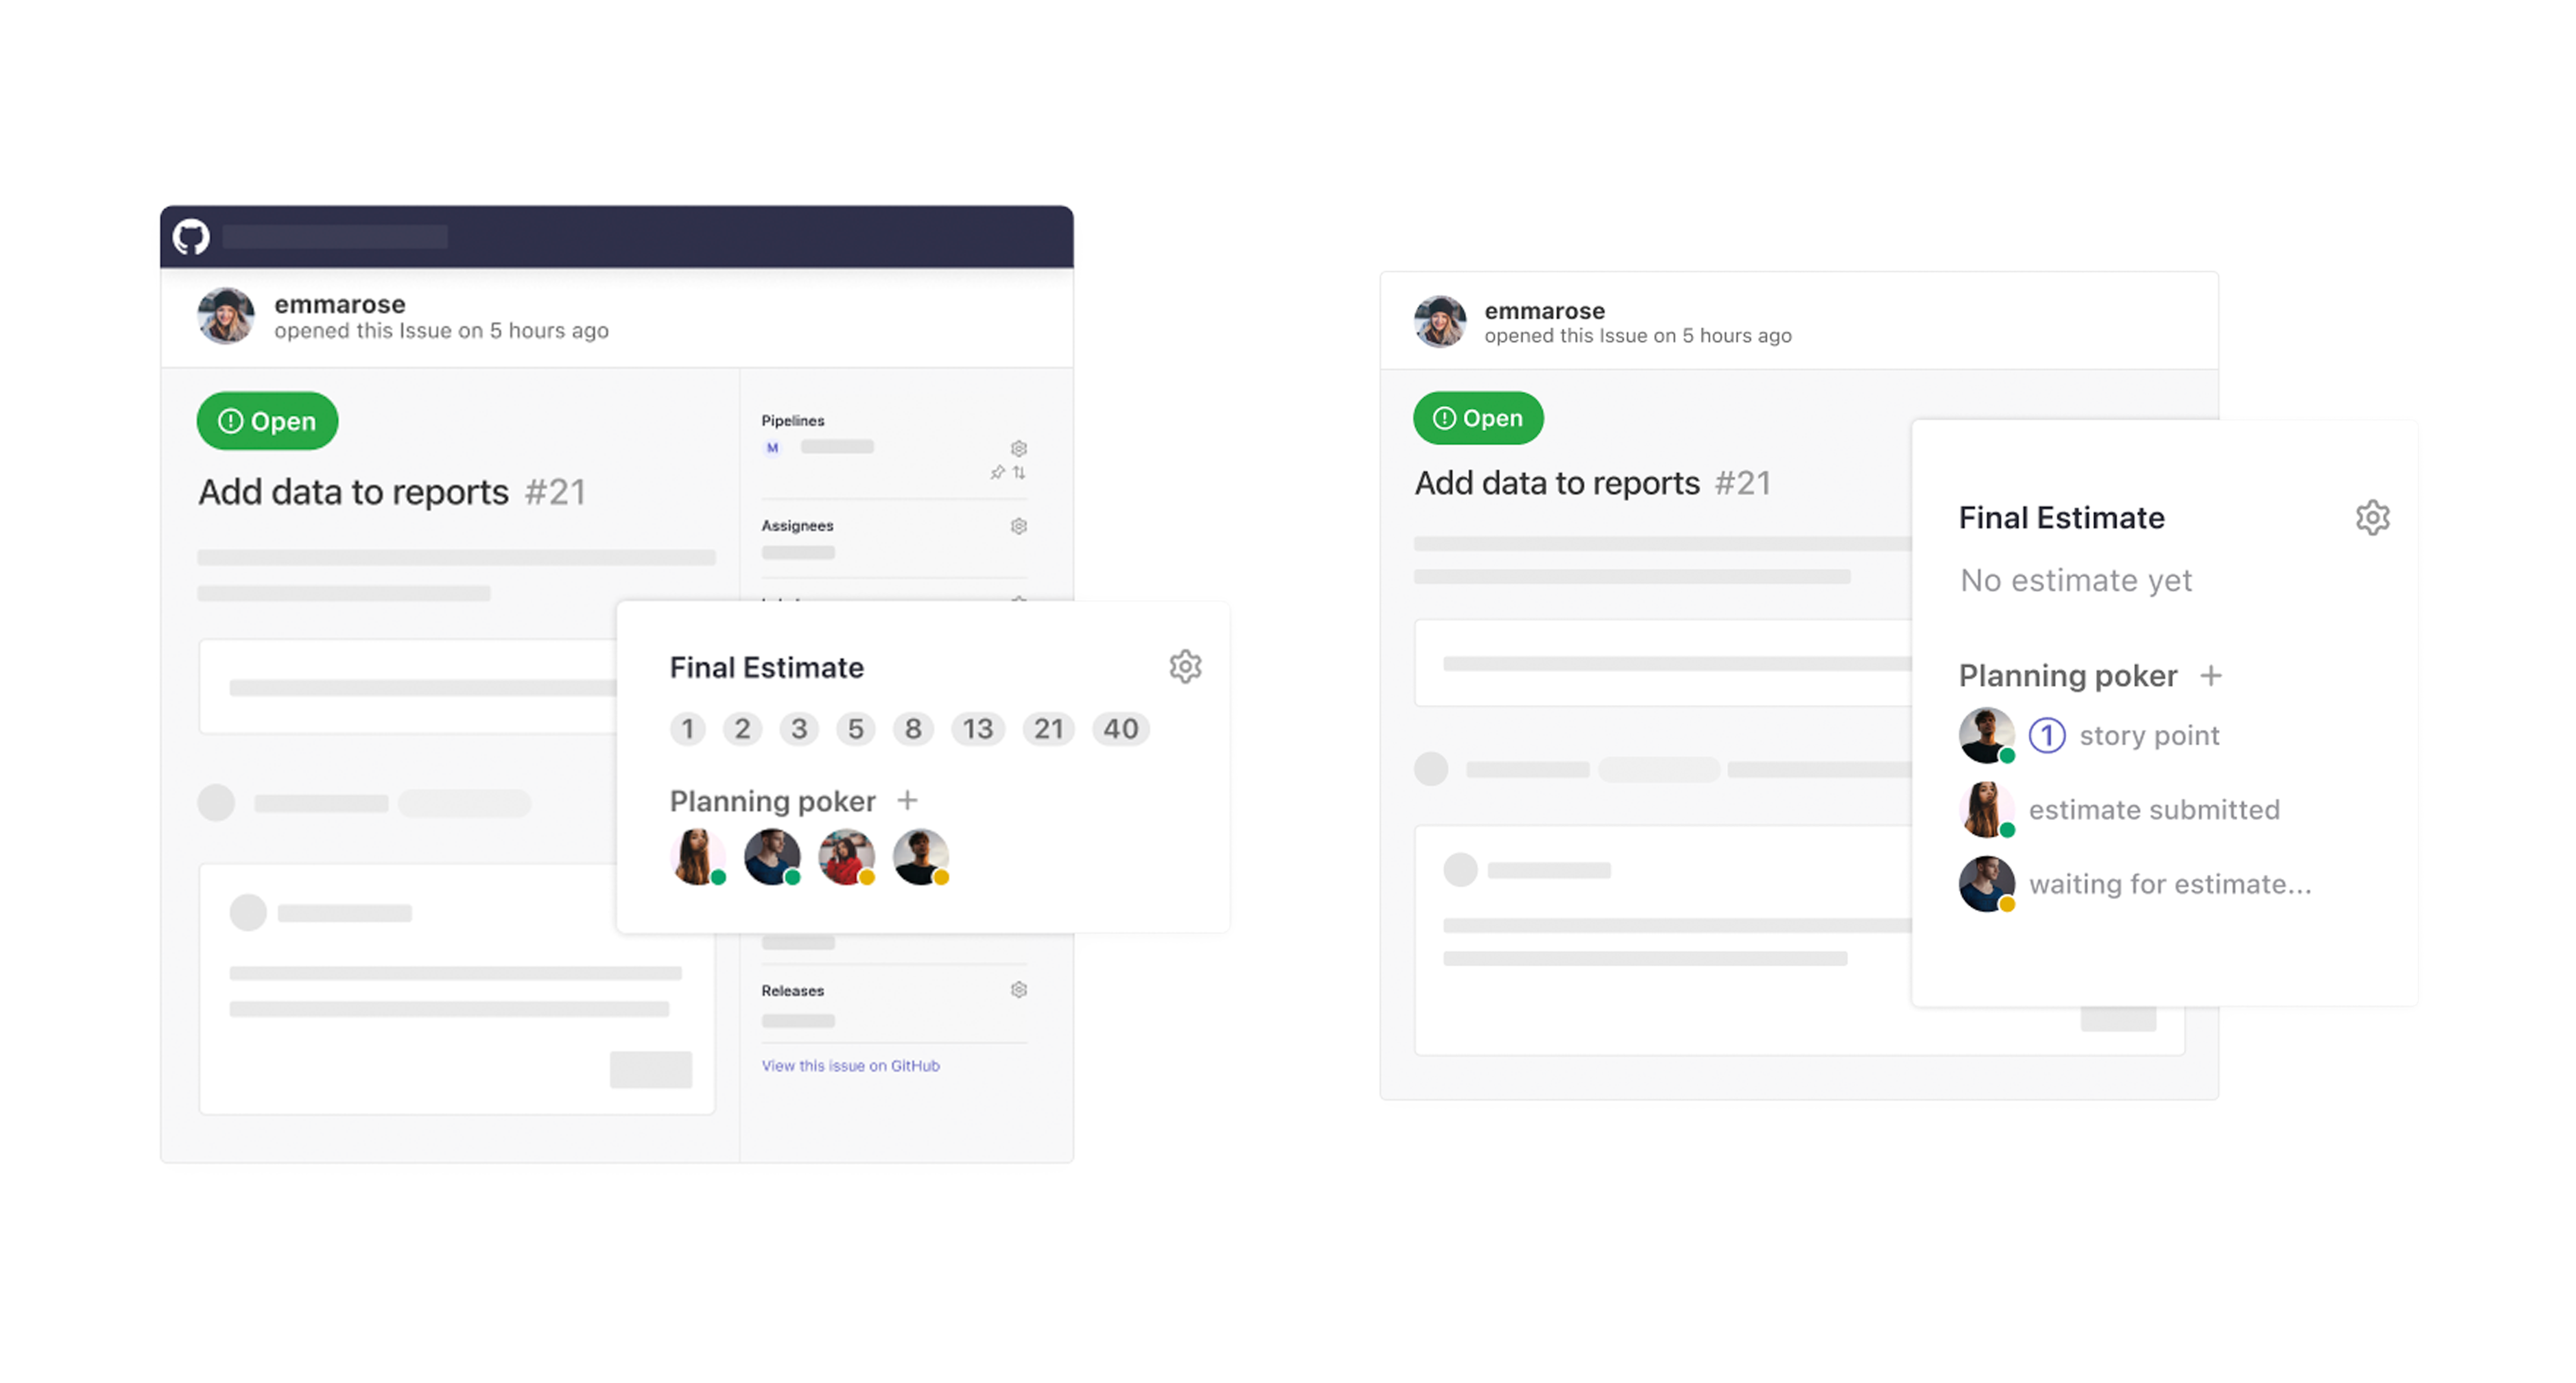 Request, provide and review story point estimates right on the issue. Reduce time spent in meetings by allowing team members to estimate on their own time right in ZenHub